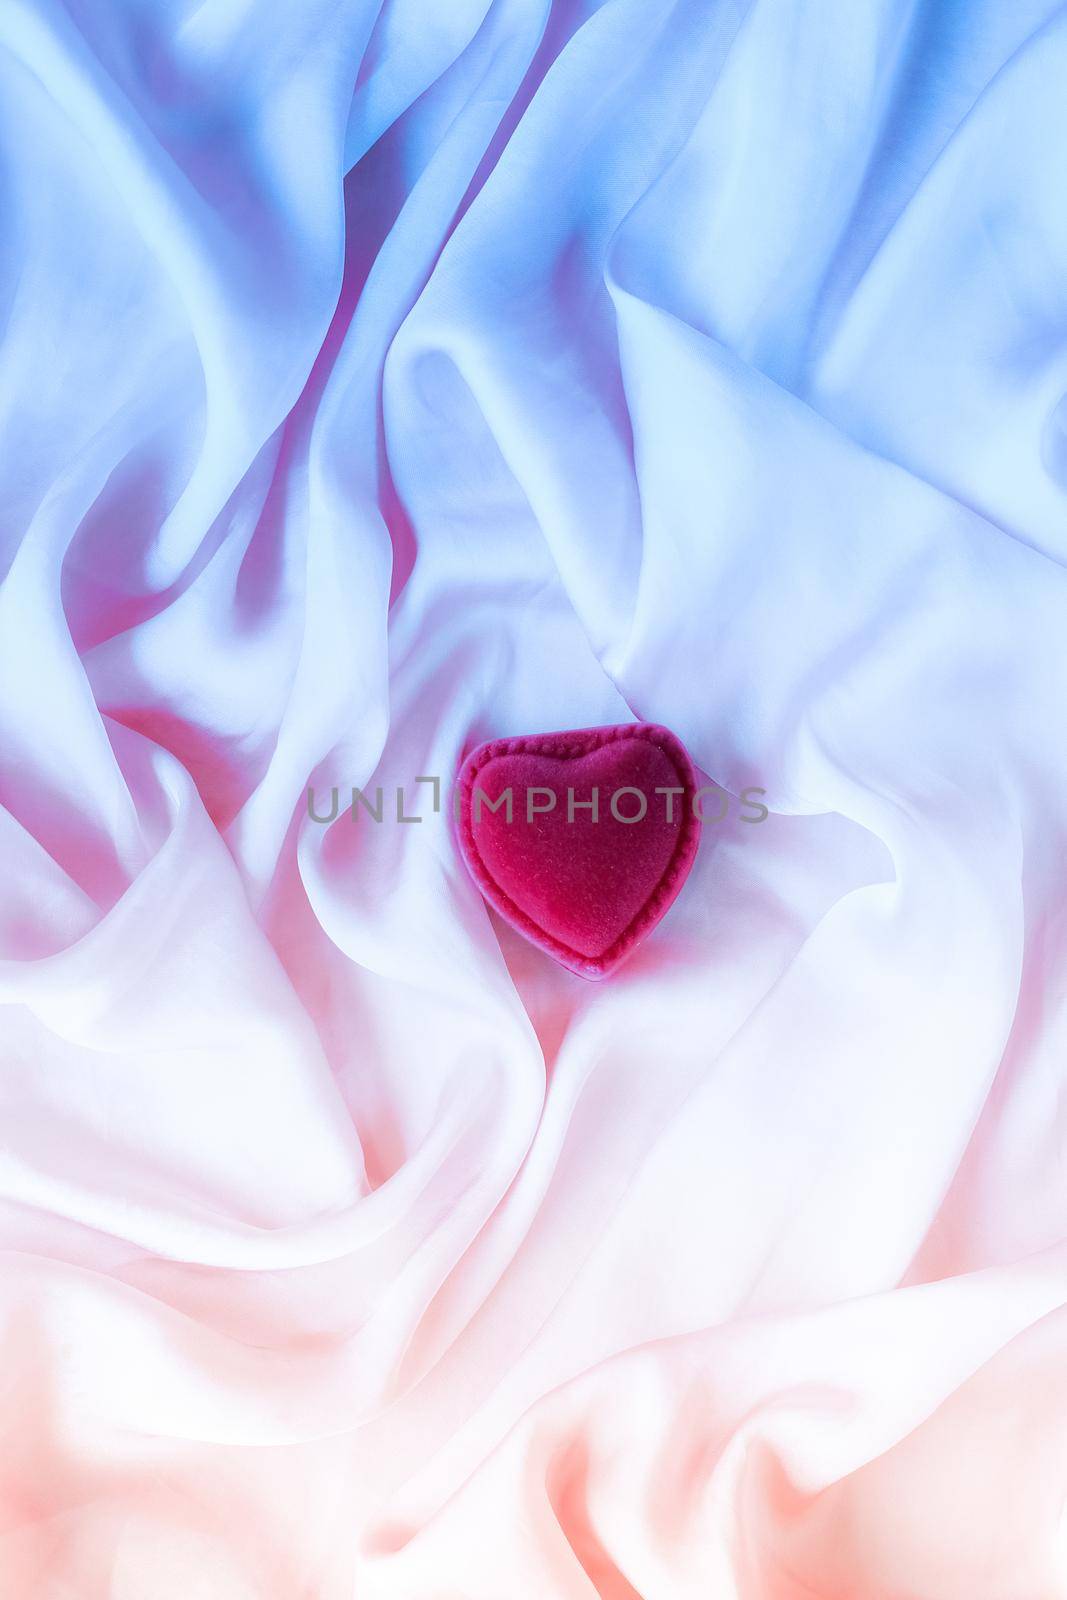 Valentine's day, true love, engagement and proposal concept - Heart-shaped gift box on neon silk. Will you be my Valentine?